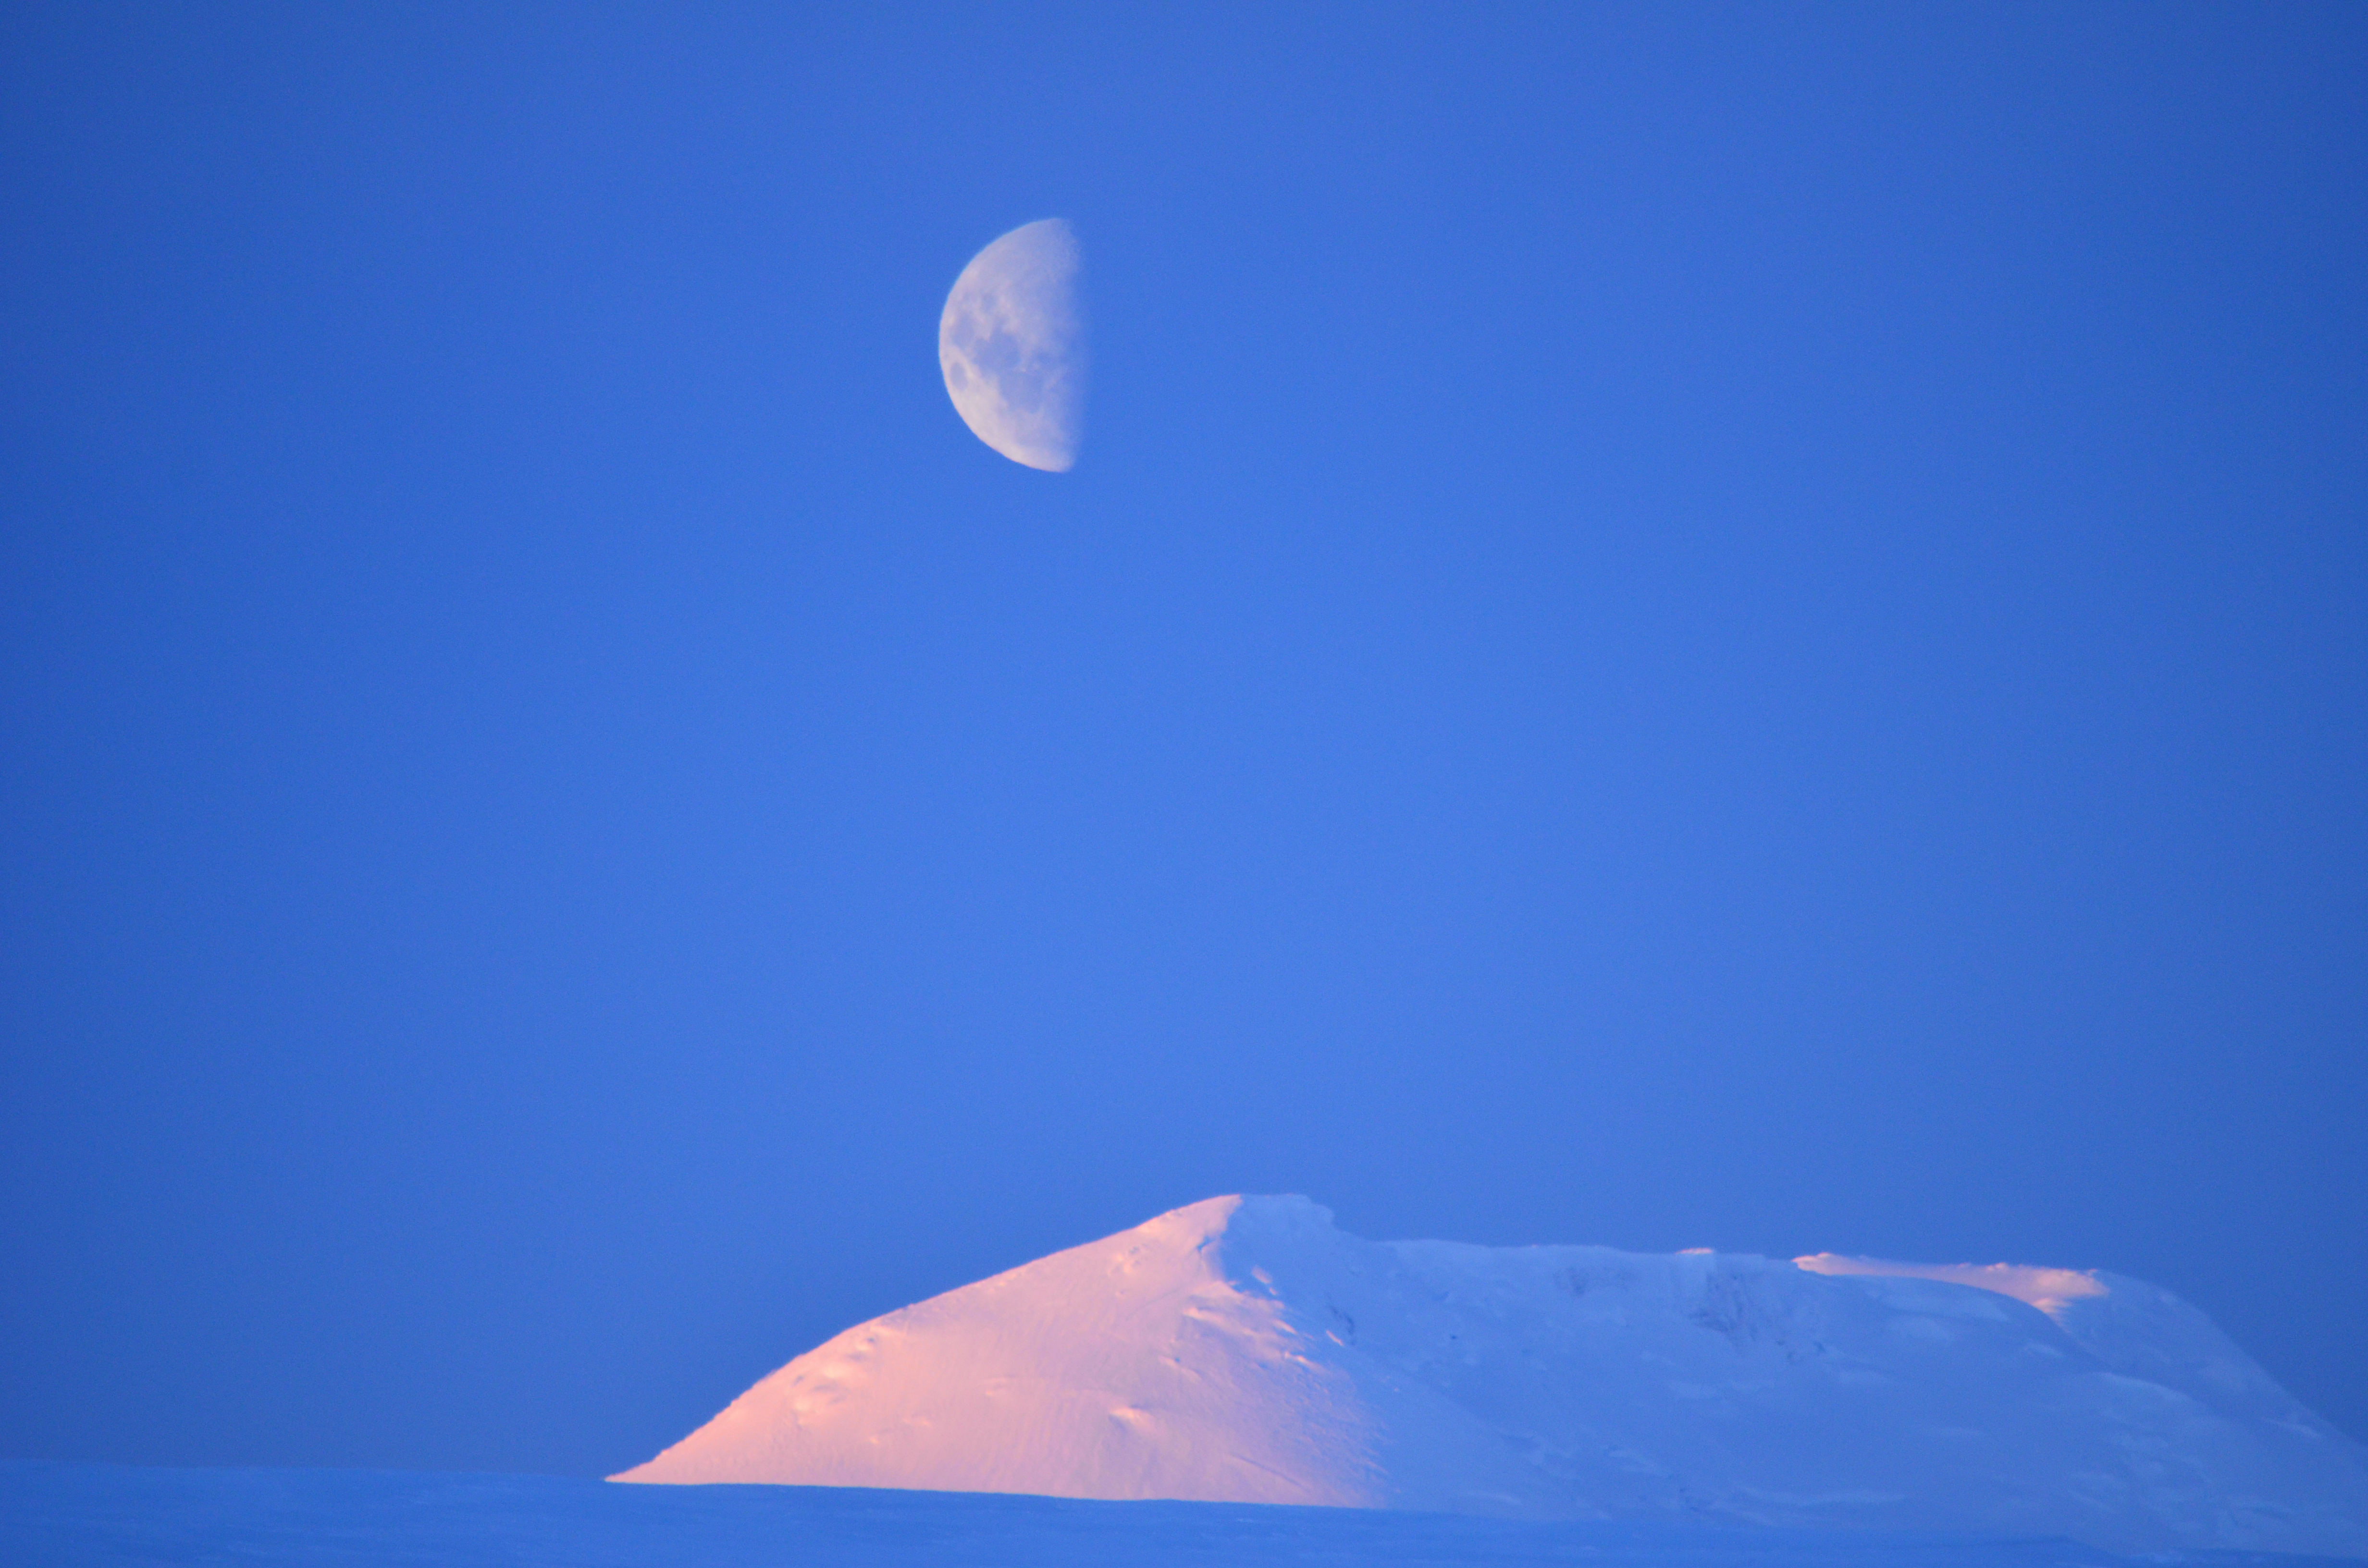 Moon over snowy hill.